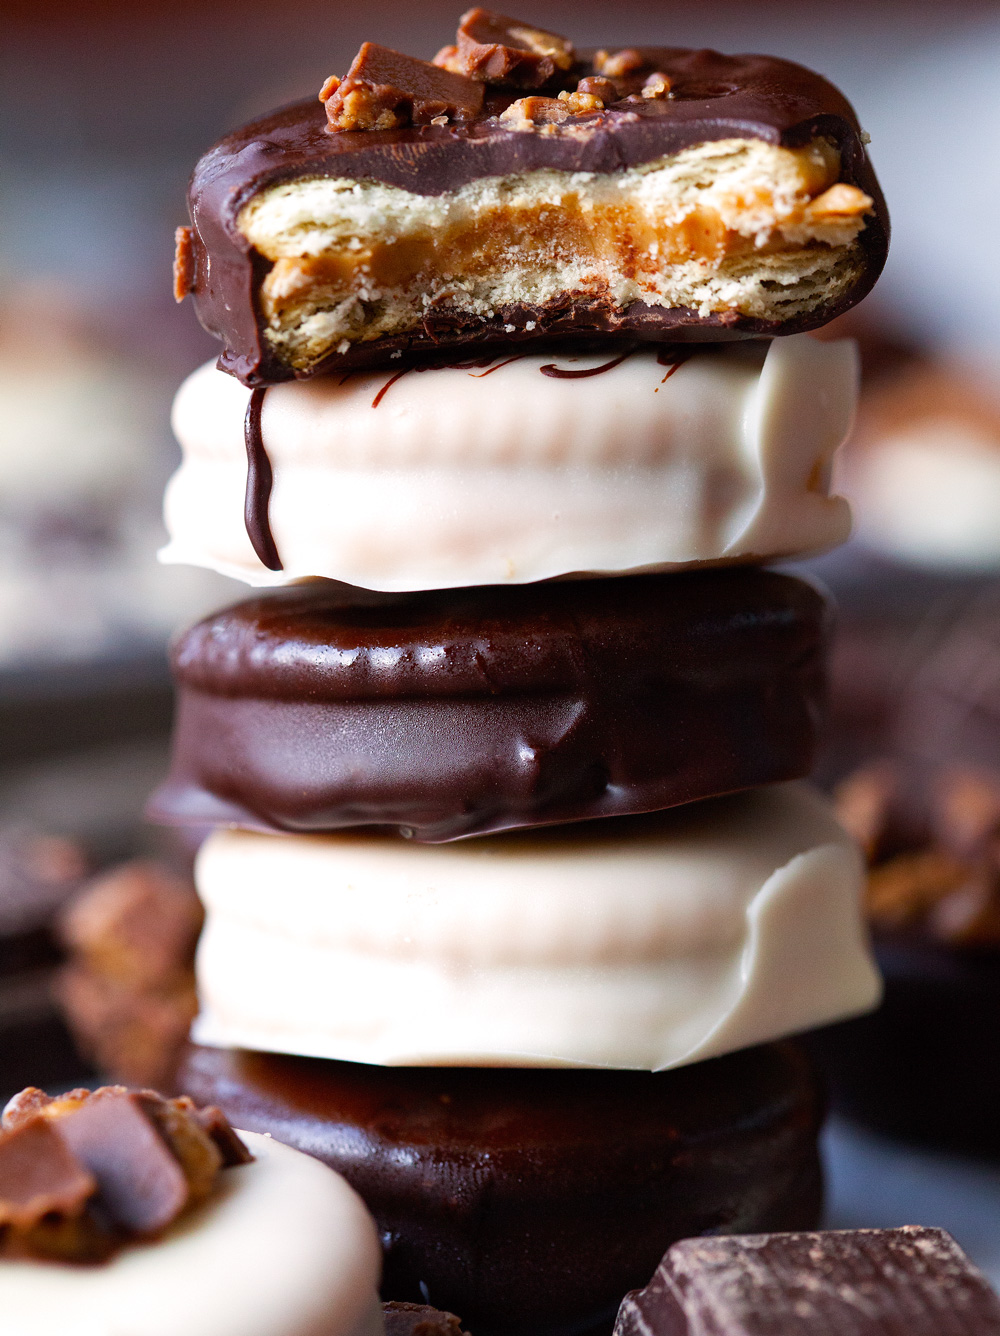 Chocolate and Peanut Butter Cracker Sandwiches by deliciouslyyum.com